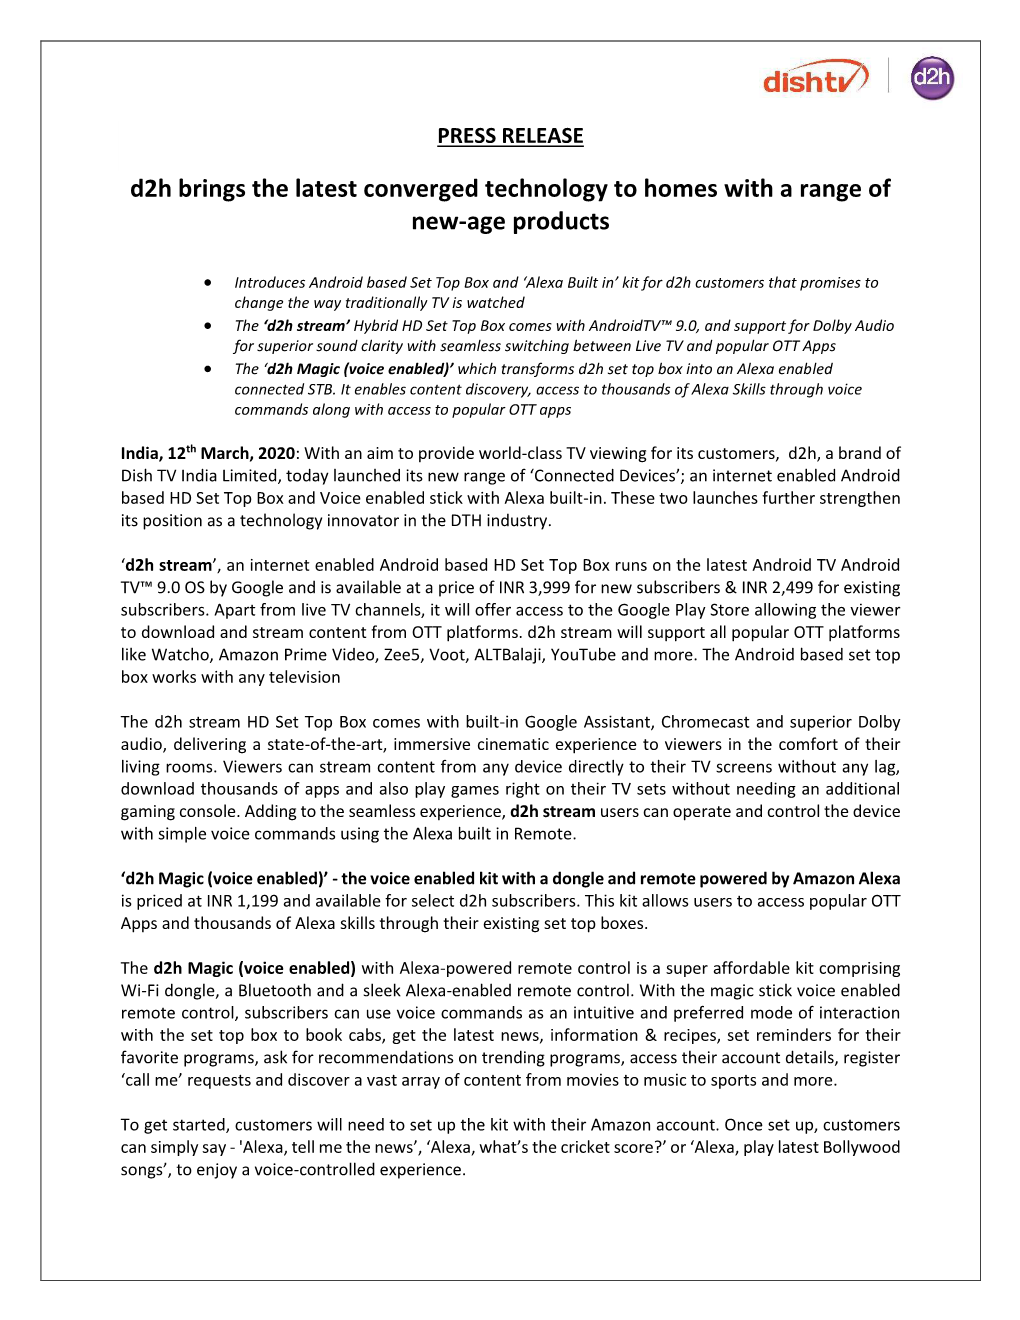 D2h Brings the Latest Converged Technology to Homes with a Range of New-Age Products